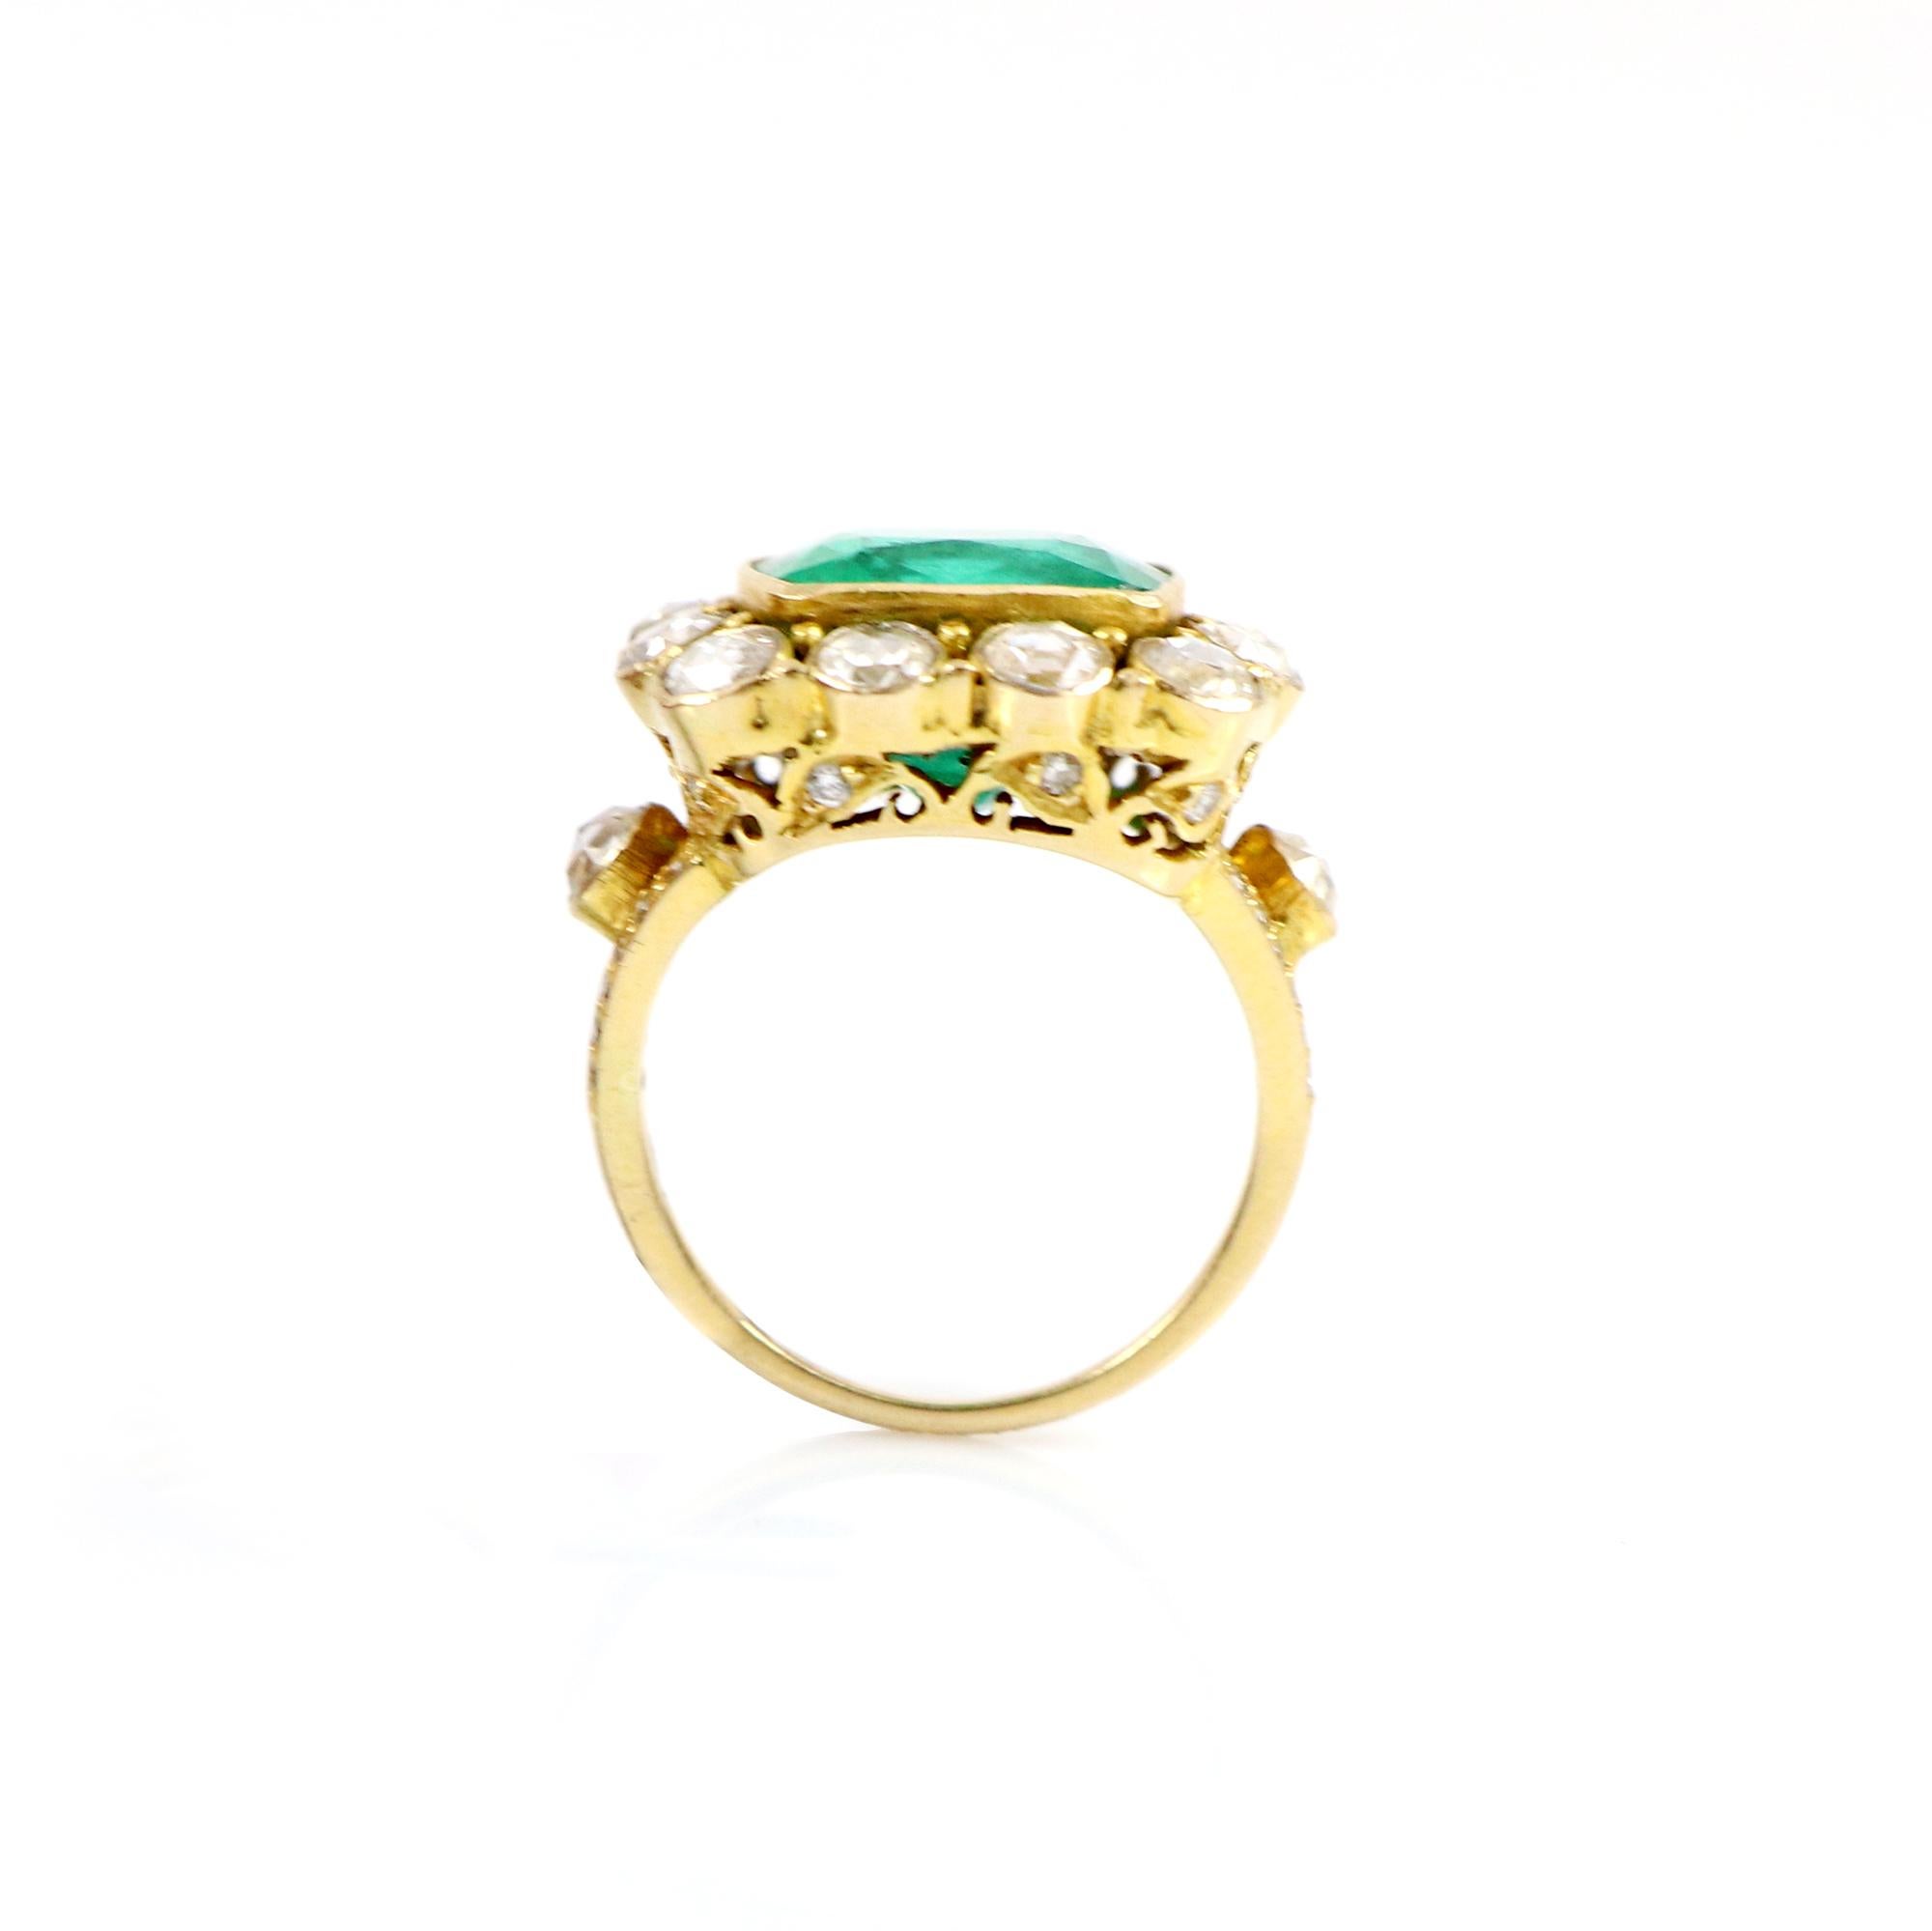 This is a classic cocktail/fashion 18k Gold Ring Studded with African Emerald and Rose Cut Diamonds around in a halo. You can also find two rose cut diamonds on the sides of the band to elevate the look, the ring band splits into two to hold and